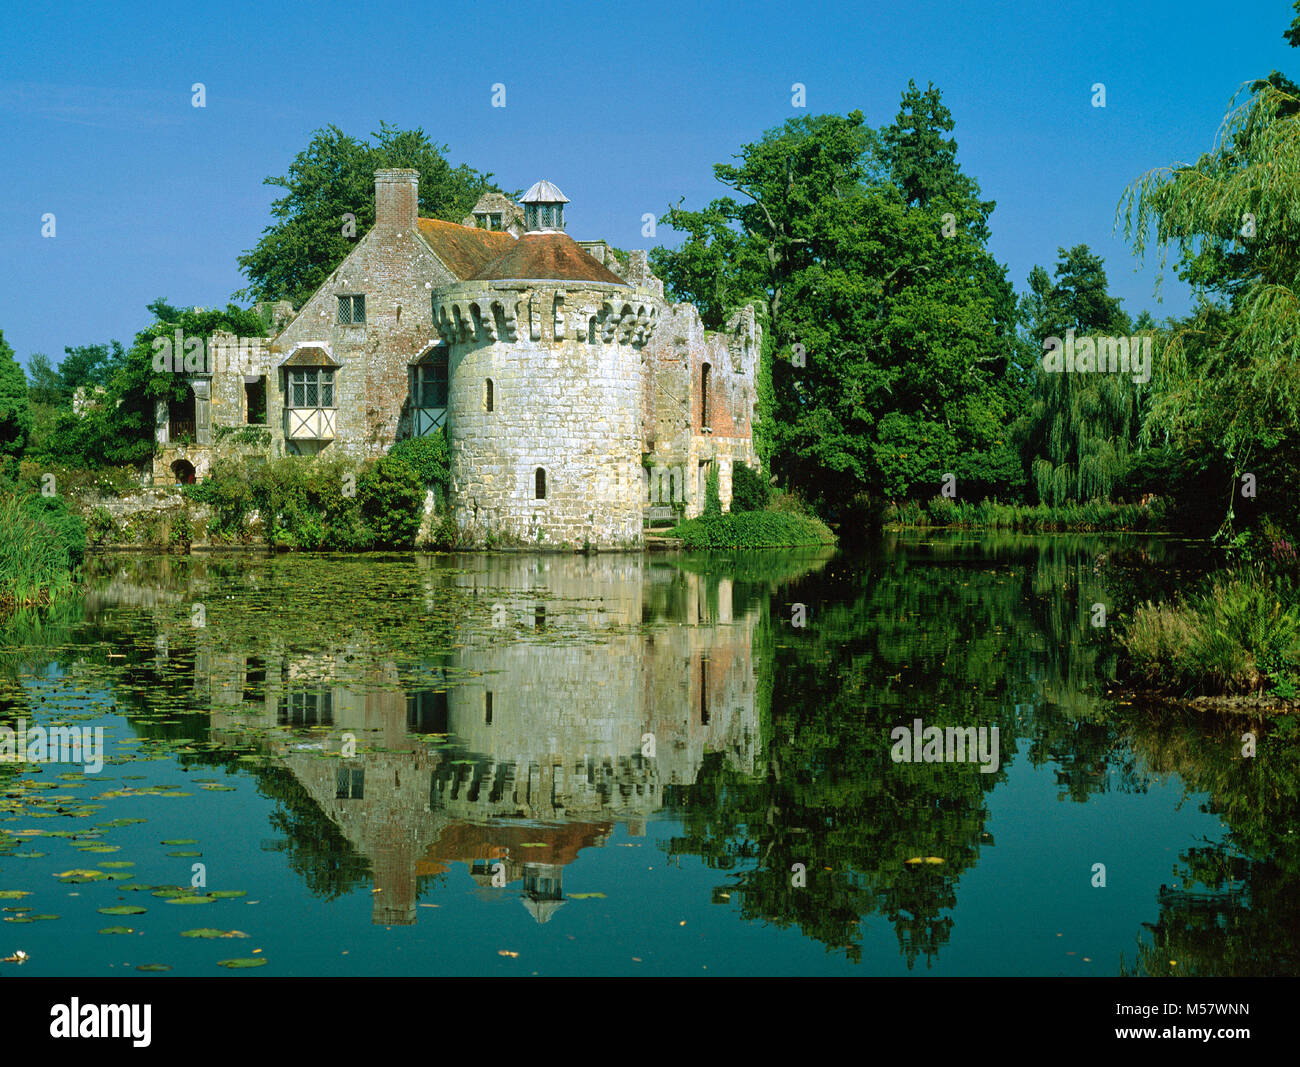 Scotney Old Castle, built in the 14th century and remaining as a feature in the grounds of the 19th century New Scotney Castle, near Lamberhurst, Kent Stock Photo